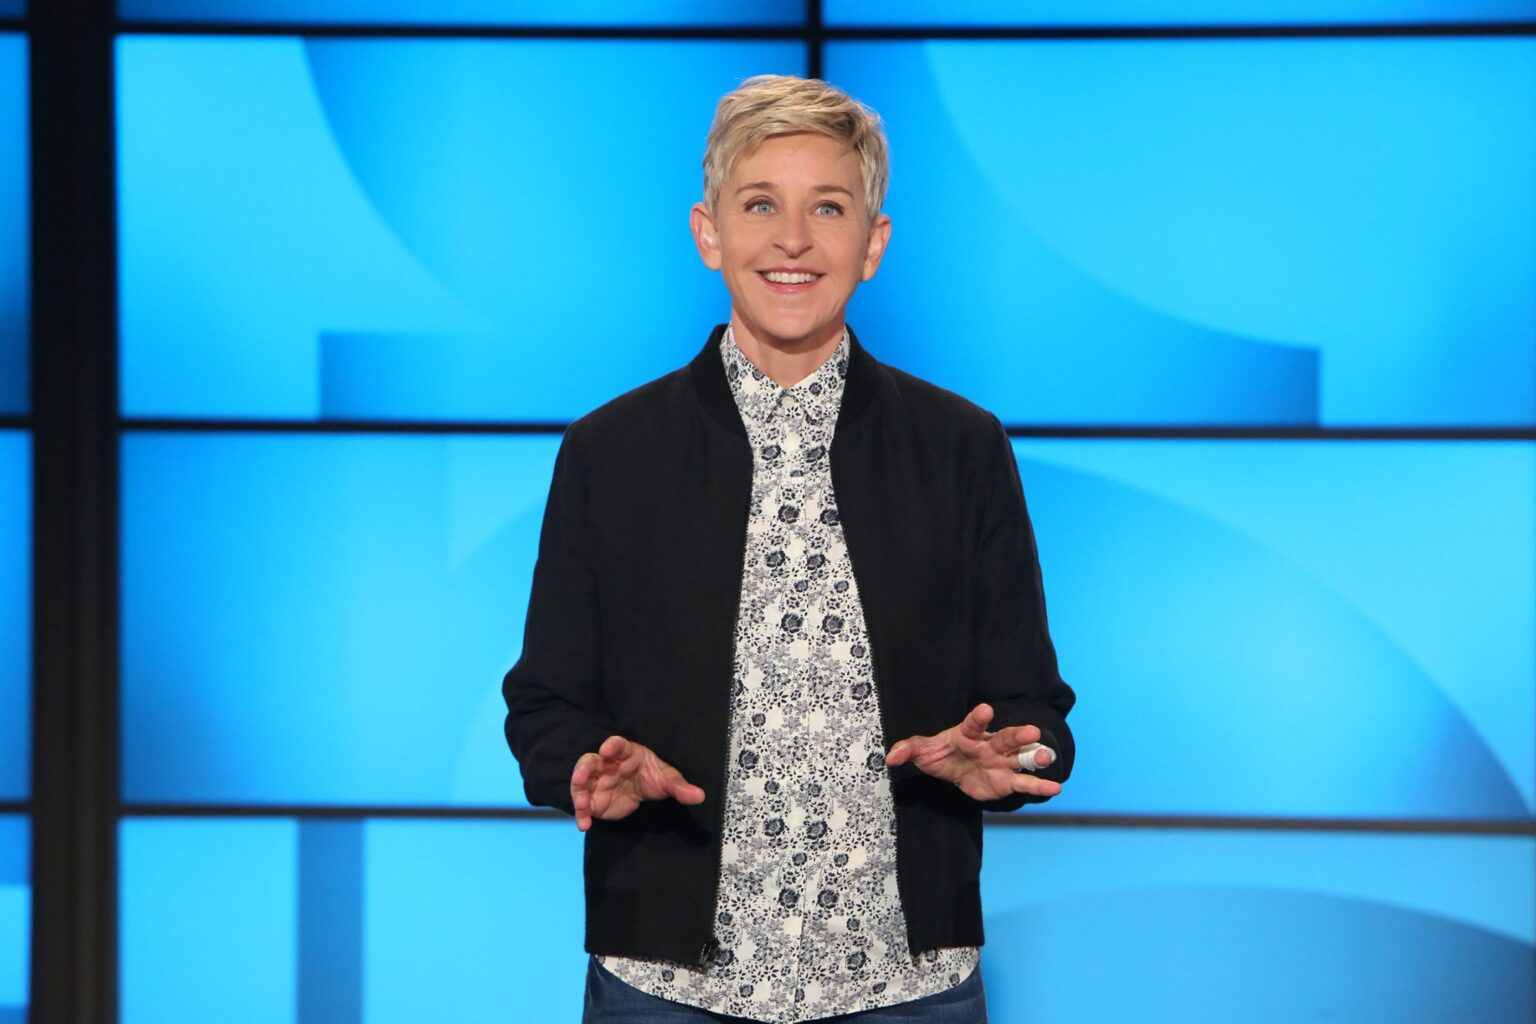 The year 2020 is doing & undoing a lot, and that includes the reputation of Ellen DeGeneres. Will Ellen keep her show? Here's what we know.